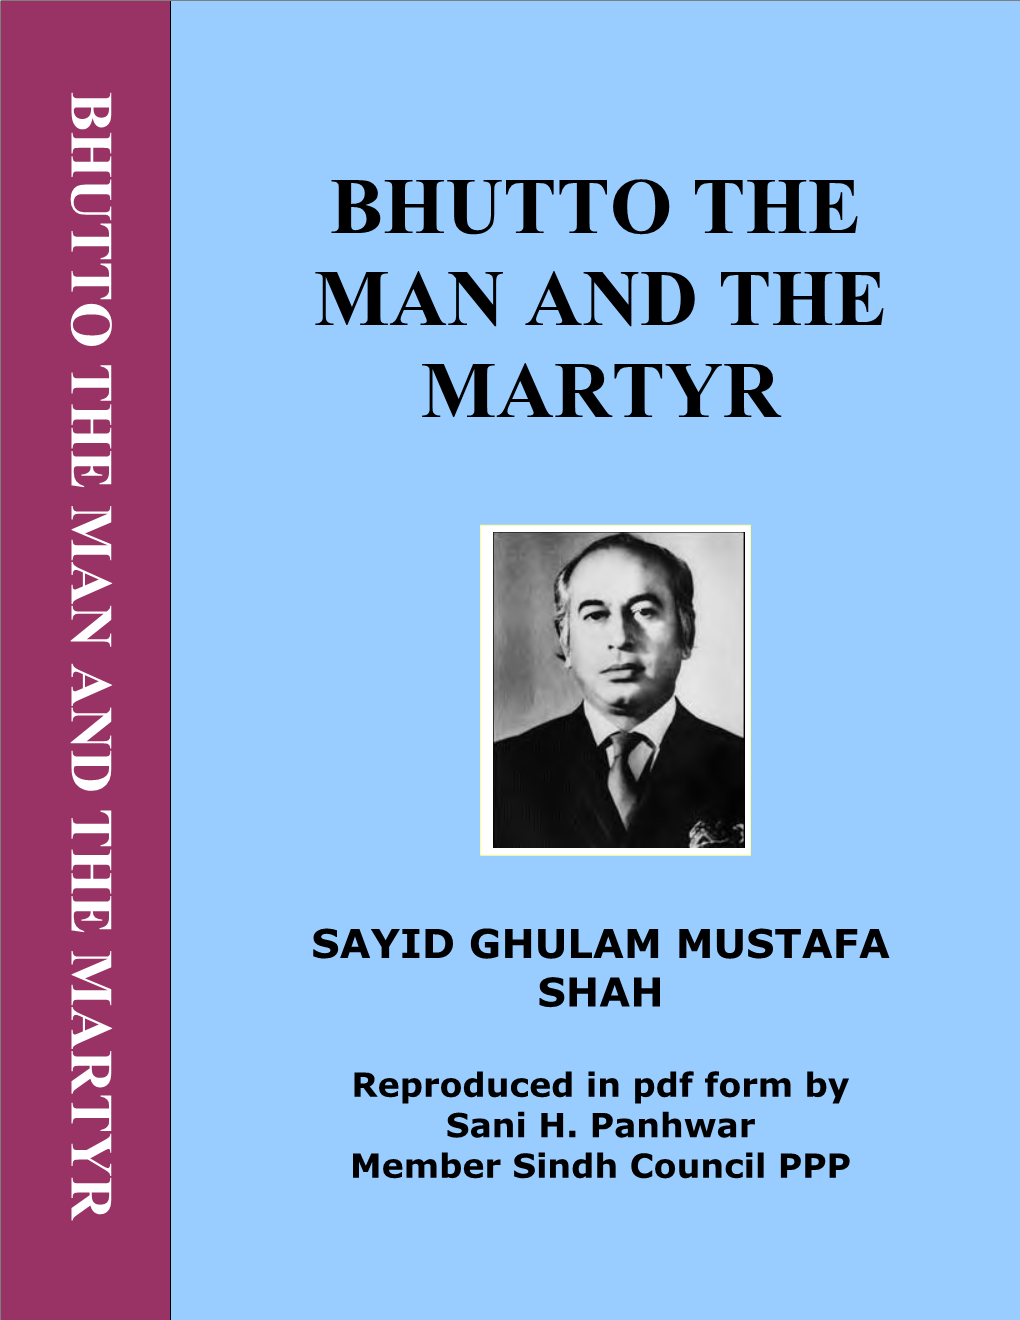 Bhutto the Man and the Martyr, by Sayid Ghulam Mustafa Shah